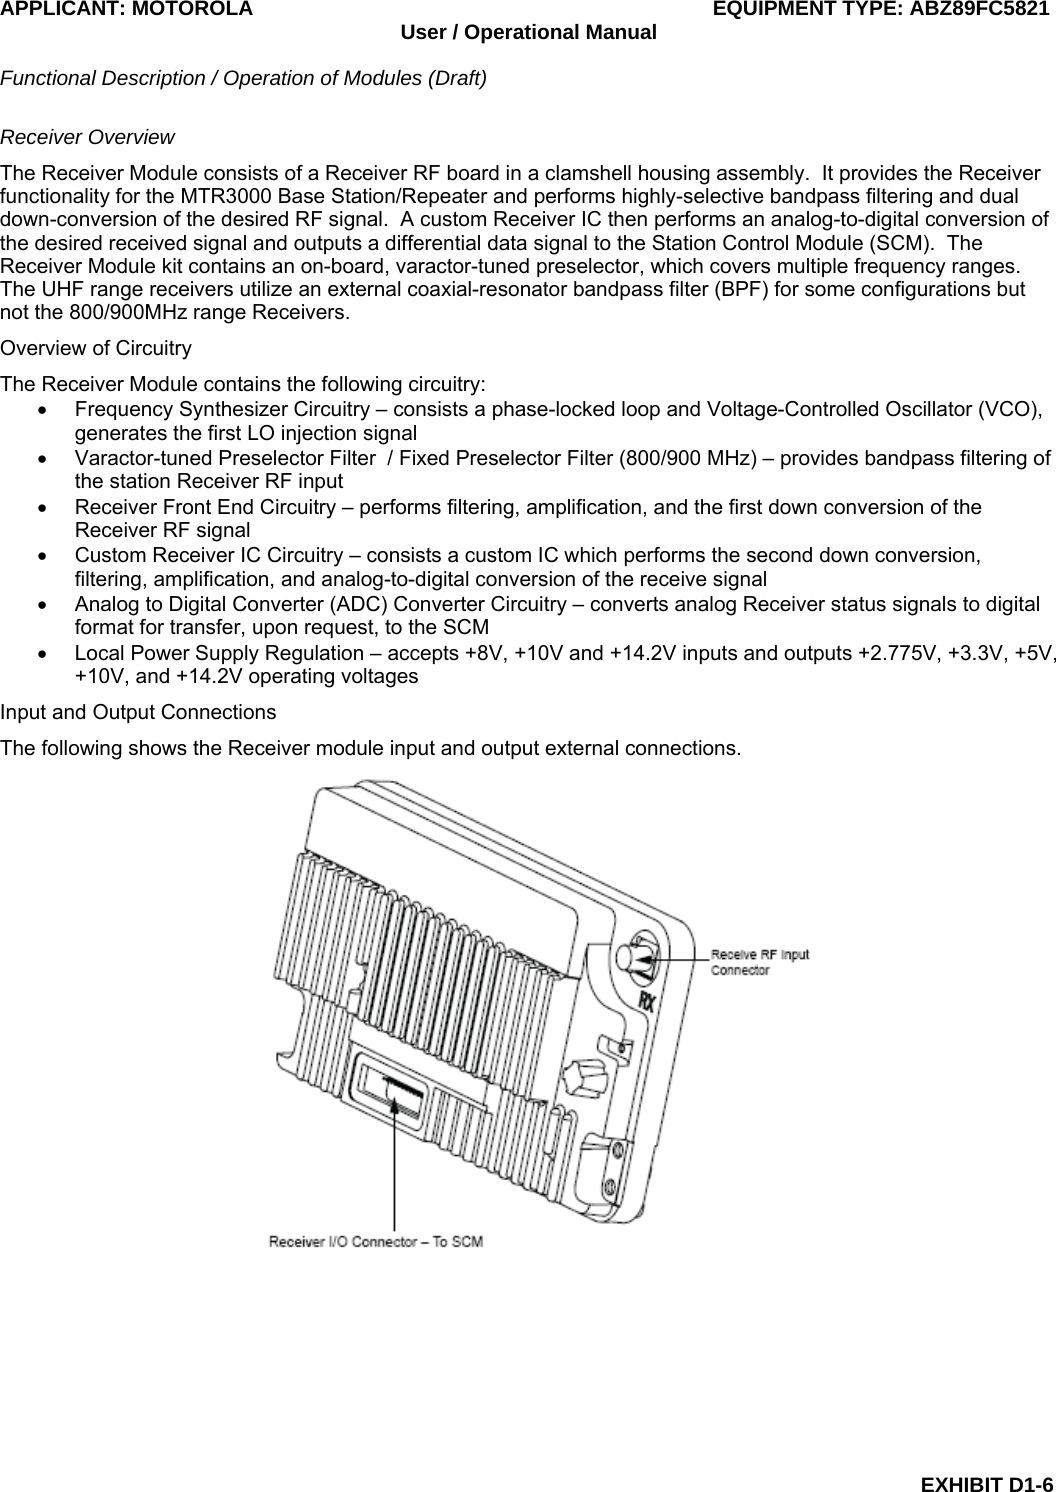 APPLICANT: MOTOROLA  EQUIPMENT TYPE: ABZ89FC5821 User / Operational Manual  Functional Description / Operation of Modules (Draft)  EXHIBIT D1-6 Receiver Overview The Receiver Module consists of a Receiver RF board in a clamshell housing assembly.  It provides the Receiver functionality for the MTR3000 Base Station/Repeater and performs highly-selective bandpass filtering and dual down-conversion of the desired RF signal.  A custom Receiver IC then performs an analog-to-digital conversion of the desired received signal and outputs a differential data signal to the Station Control Module (SCM).  The Receiver Module kit contains an on-board, varactor-tuned preselector, which covers multiple frequency ranges. The UHF range receivers utilize an external coaxial-resonator bandpass filter (BPF) for some configurations but not the 800/900MHz range Receivers. Overview of Circuitry The Receiver Module contains the following circuitry: •  Frequency Synthesizer Circuitry – consists a phase-locked loop and Voltage-Controlled Oscillator (VCO), generates the first LO injection signal •  Varactor-tuned Preselector Filter  / Fixed Preselector Filter (800/900 MHz) – provides bandpass filtering of the station Receiver RF input •  Receiver Front End Circuitry – performs filtering, amplification, and the first down conversion of the Receiver RF signal •  Custom Receiver IC Circuitry – consists a custom IC which performs the second down conversion, filtering, amplification, and analog-to-digital conversion of the receive signal •  Analog to Digital Converter (ADC) Converter Circuitry – converts analog Receiver status signals to digital format for transfer, upon request, to the SCM •  Local Power Supply Regulation – accepts +8V, +10V and +14.2V inputs and outputs +2.775V, +3.3V, +5V, +10V, and +14.2V operating voltages Input and Output Connections The following shows the Receiver module input and output external connections.  